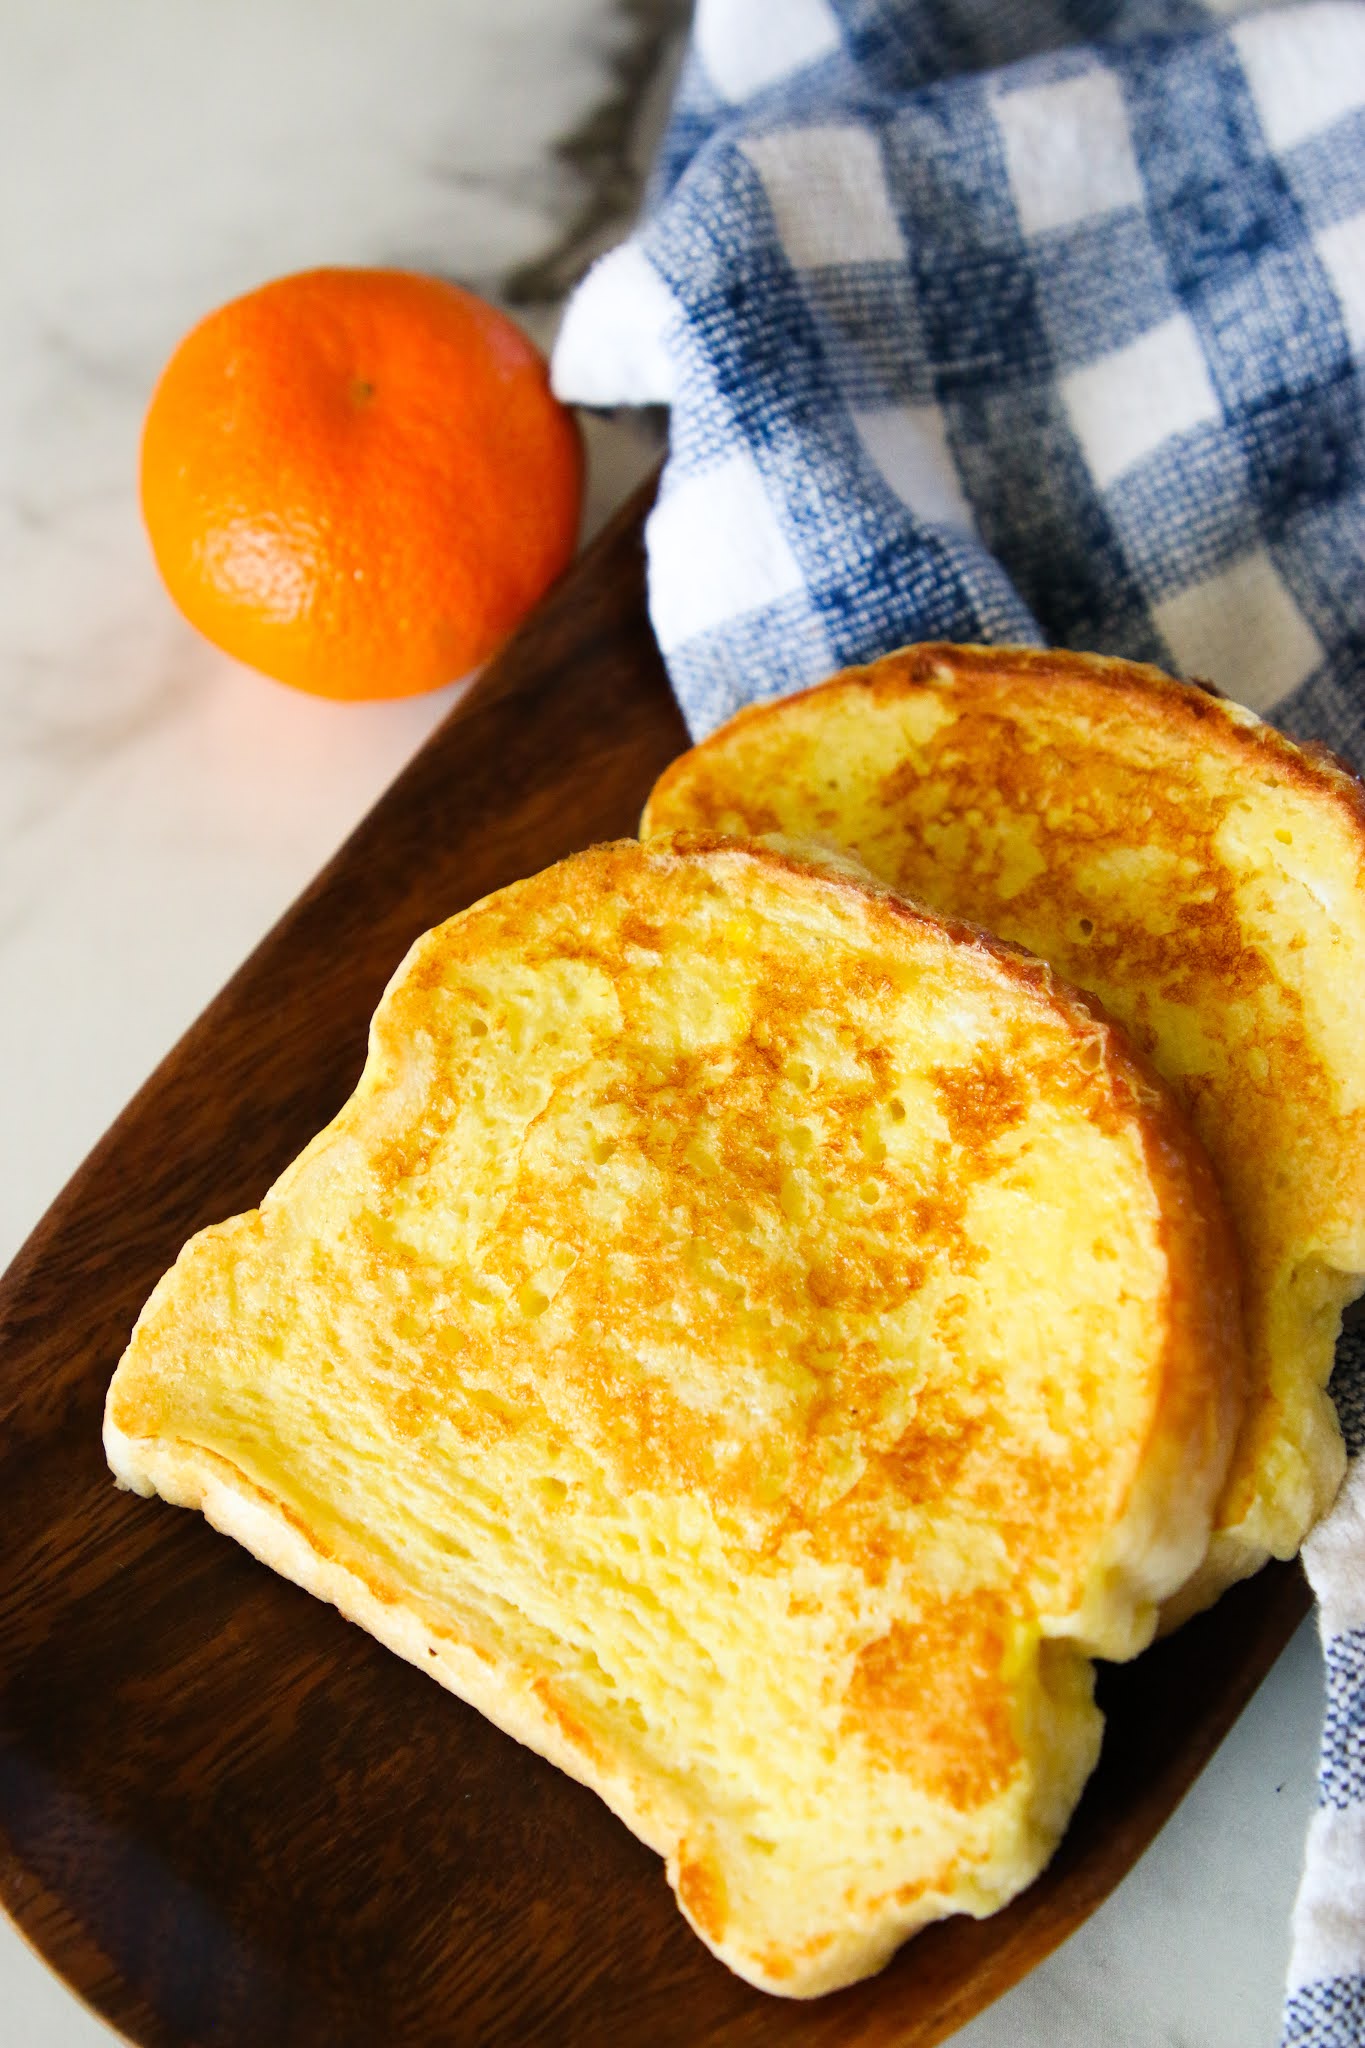 Two pieces of French Toast on a wood plate with a blue dish towel and an orange in the background. There is a for holding a bite of the French Toast.